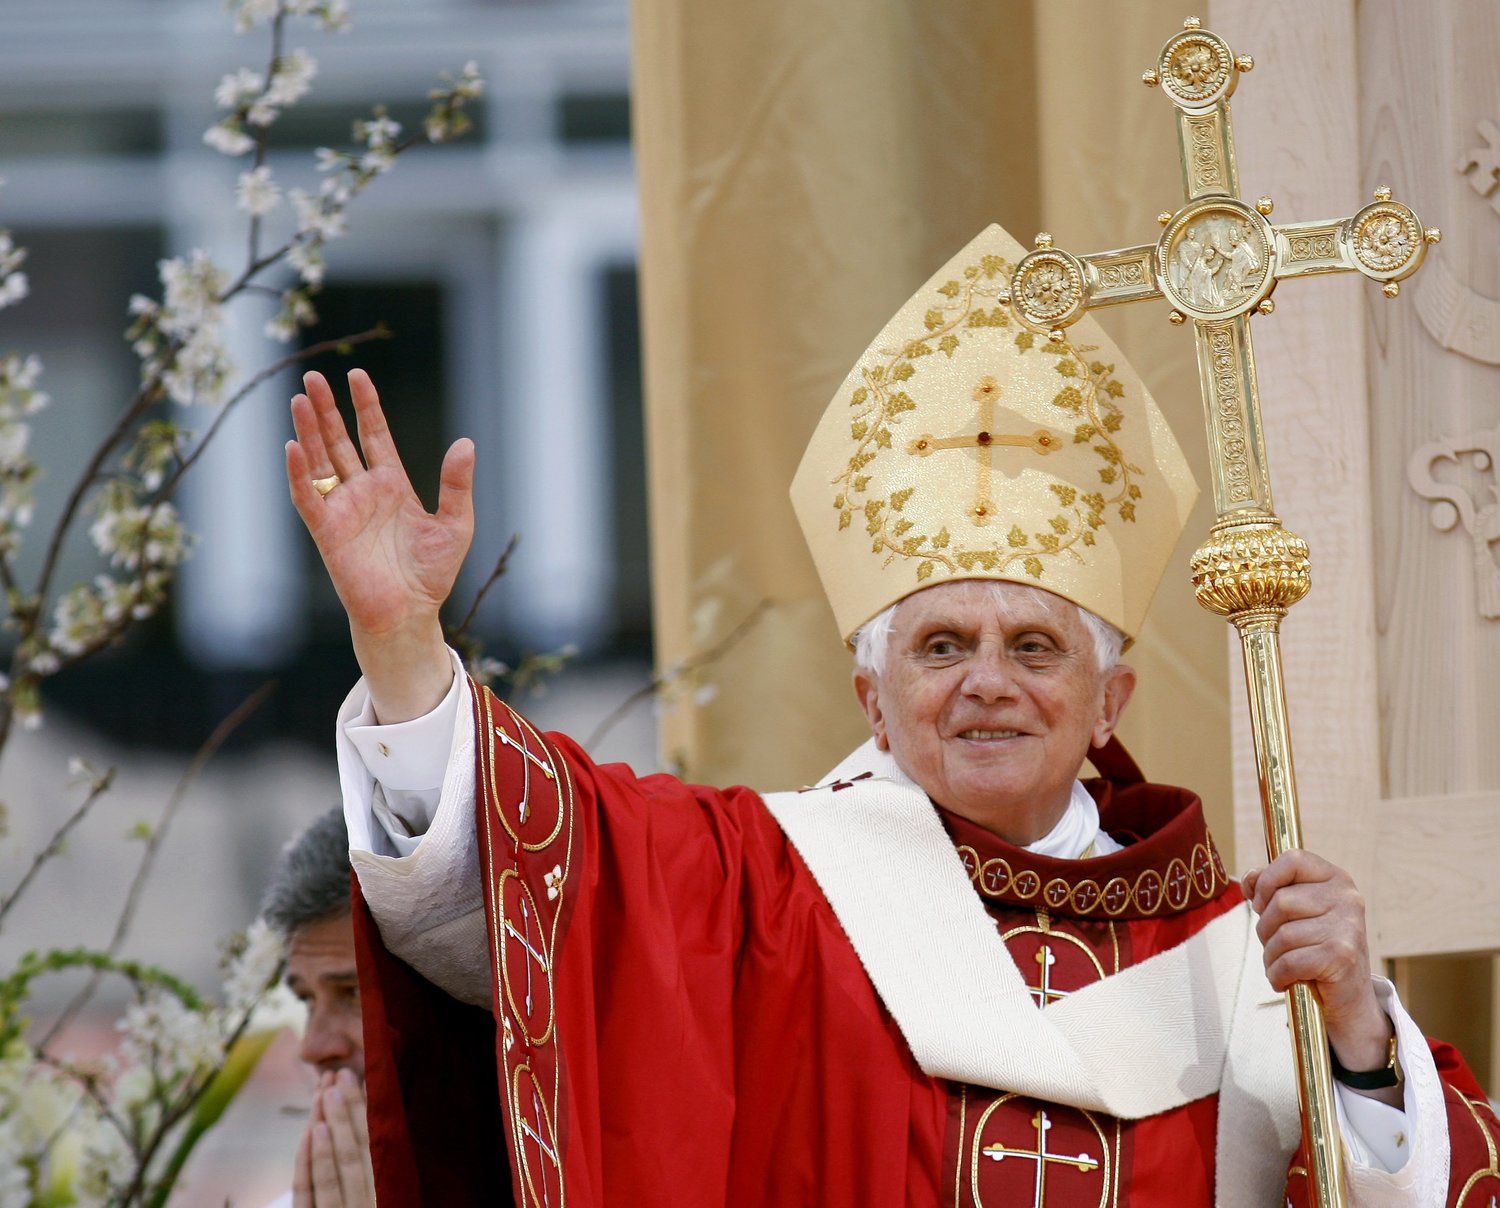 Pope Benedict XVI smiles as he bids the crowd farewell after celebrating Mass at Nationals Park in Washington April 17, 2008. Pope Benedict died Dec. 31, 2022, at the age of 95.